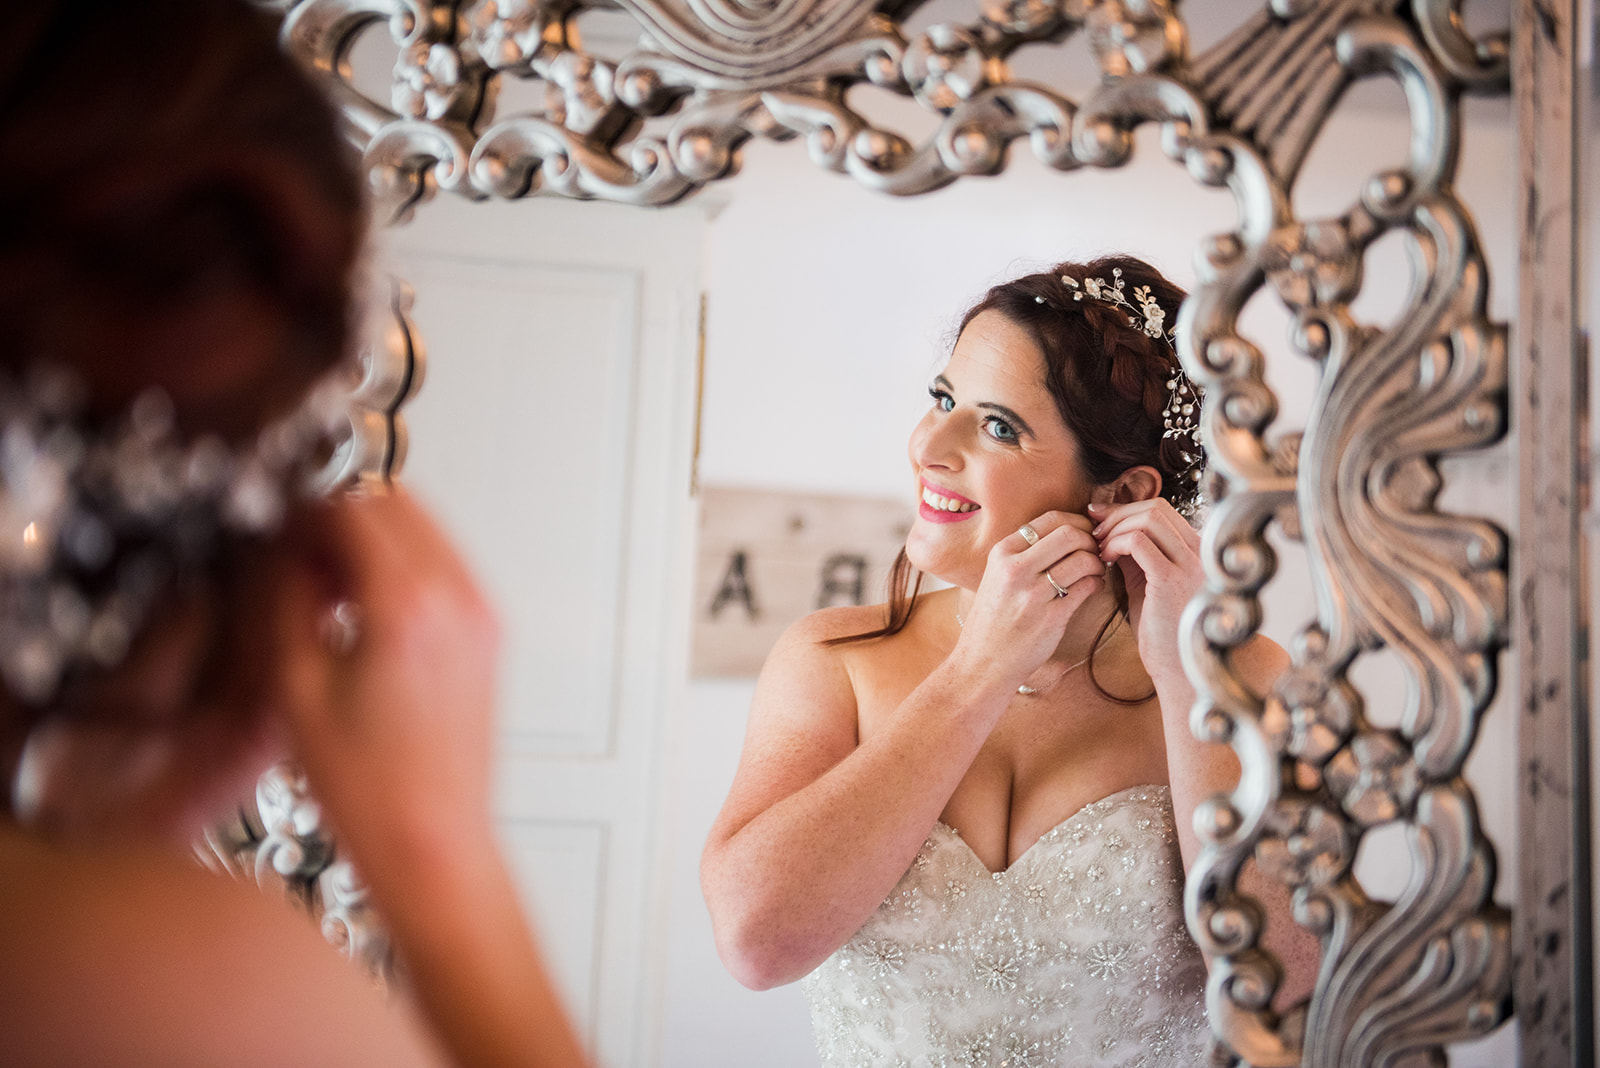 Bride looks into elegant mirror as she puts the finishing getting ready touches on.